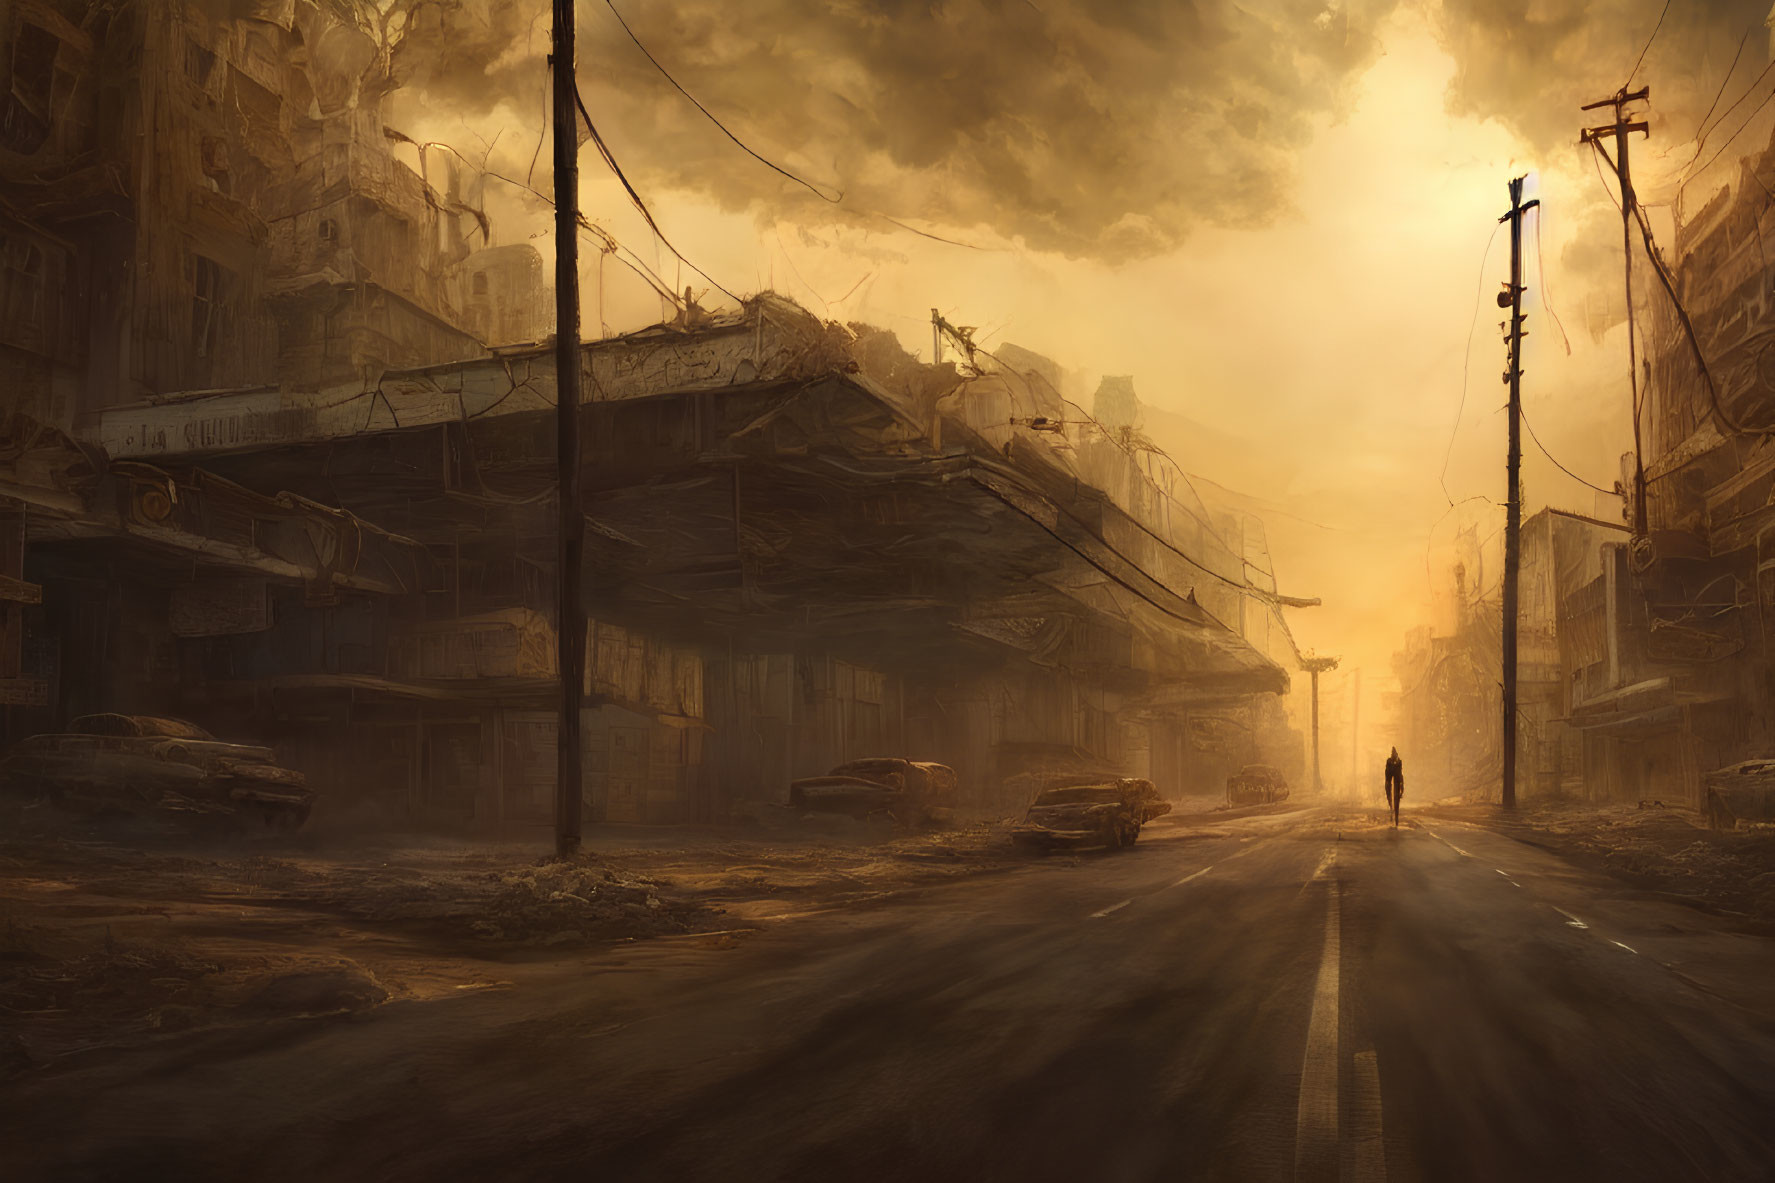 Desolate street scene with solitary figure amidst ruins